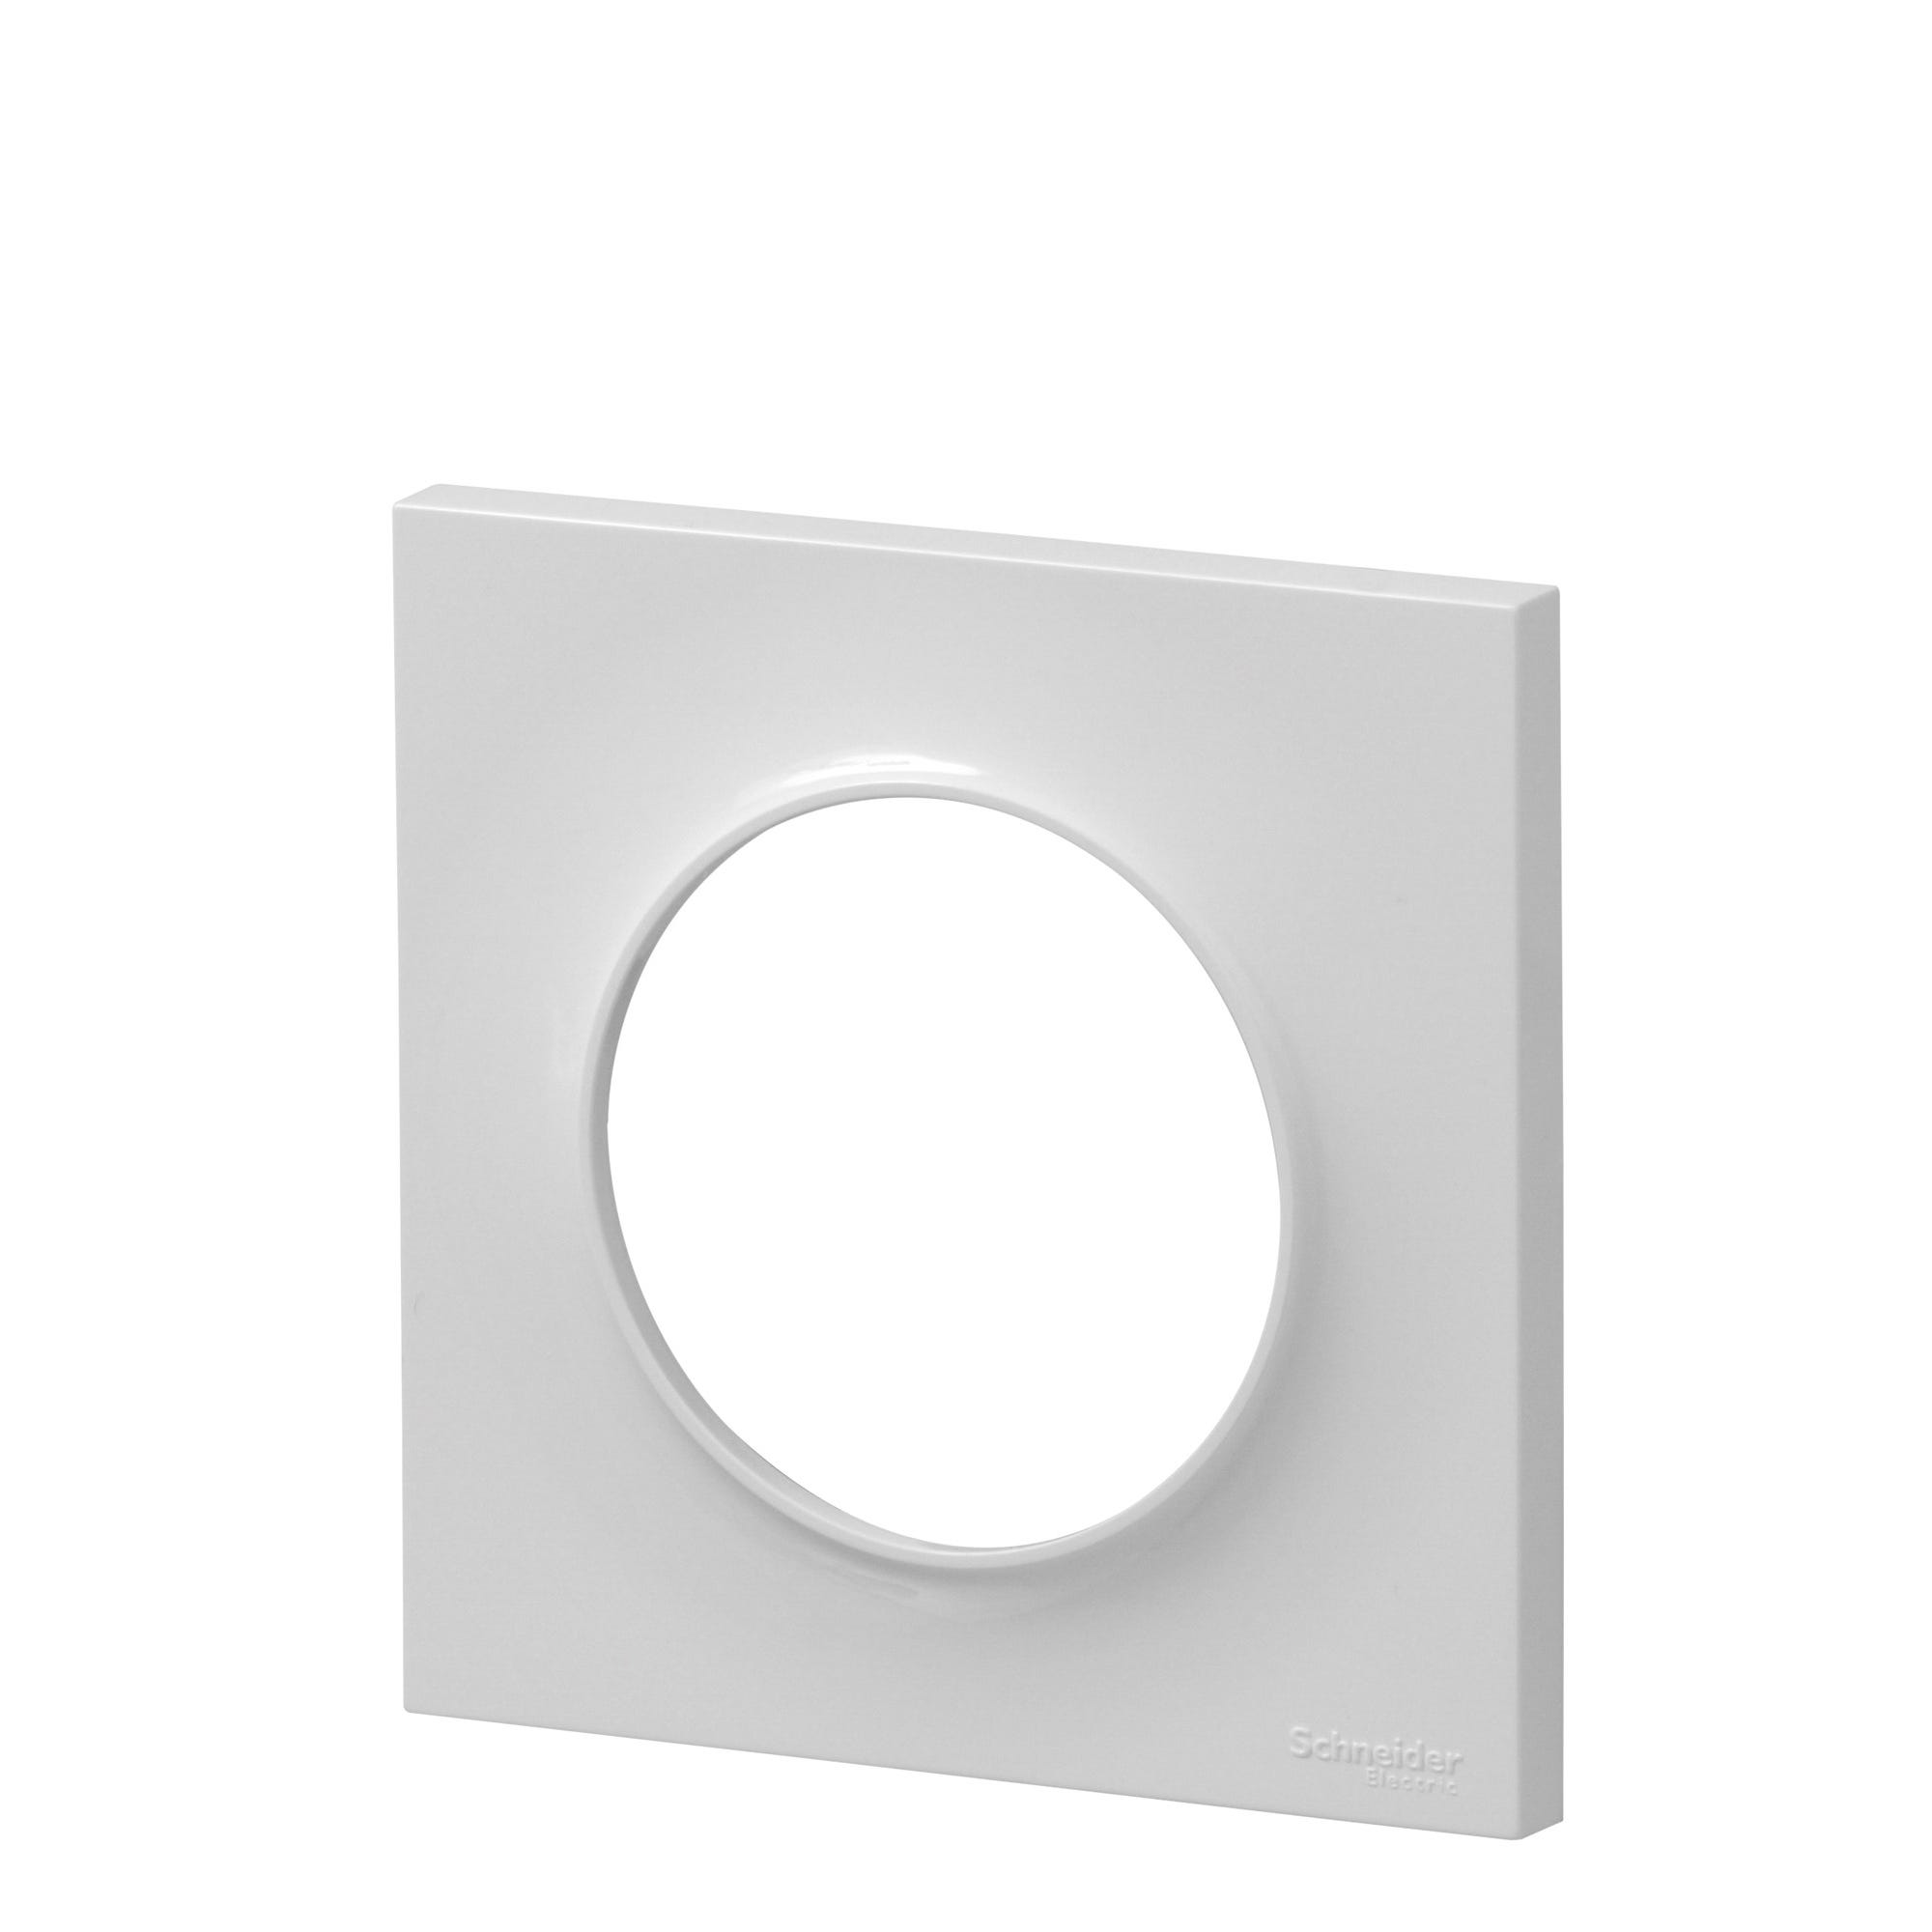 Plaque simple blanc Odace Style - SCHNEIDER ELECTRIC 1